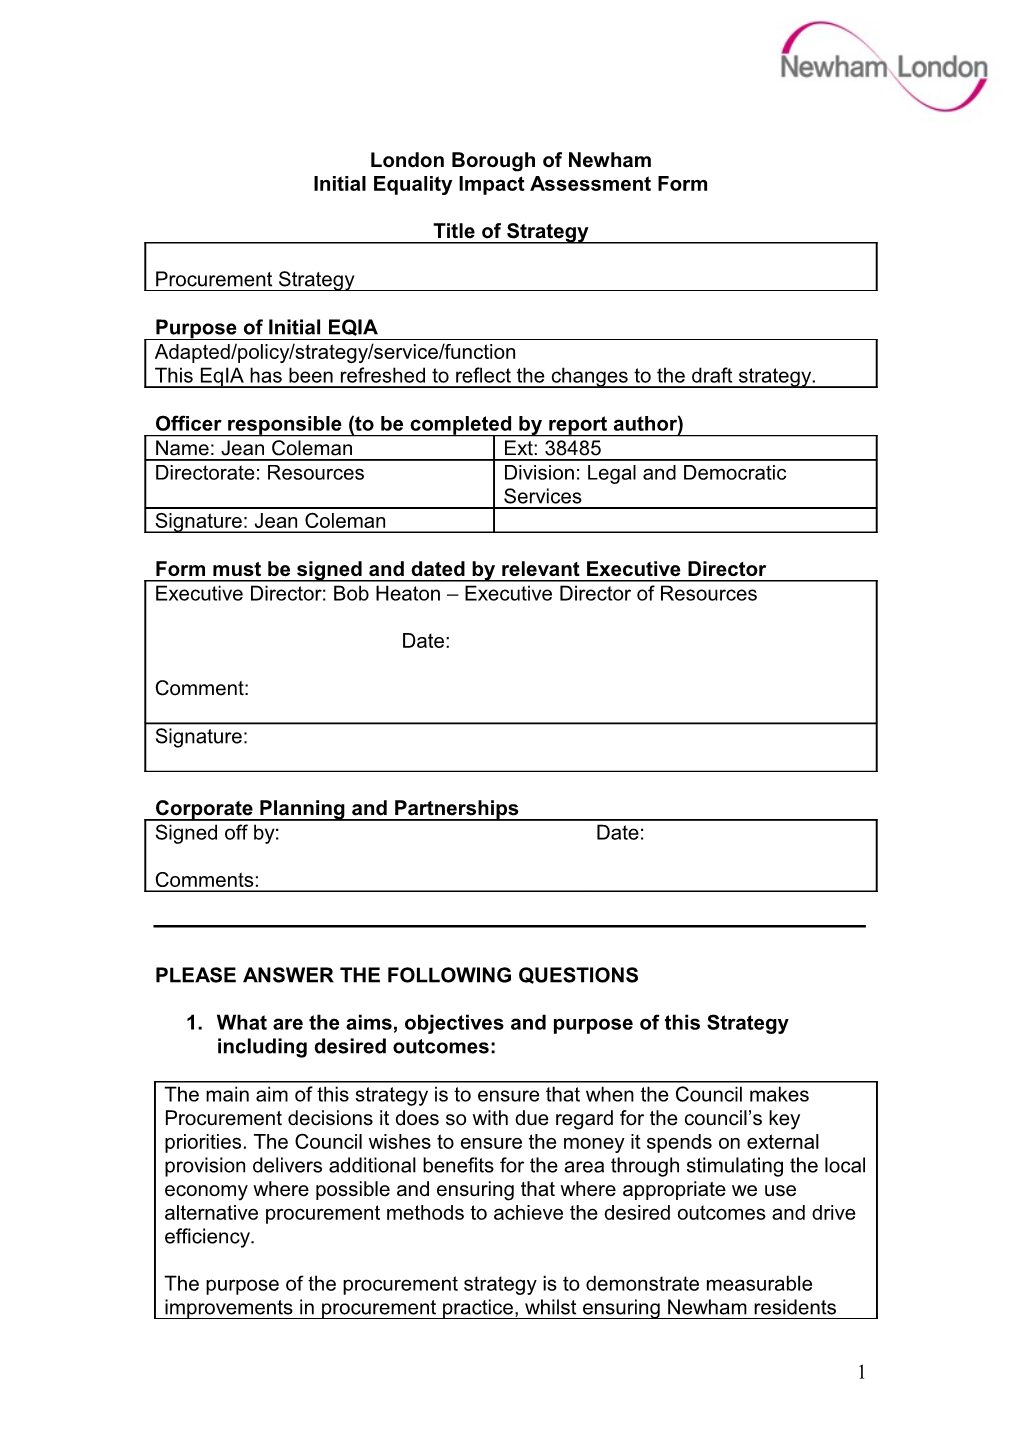 Initial Equality Impact Assessment Form